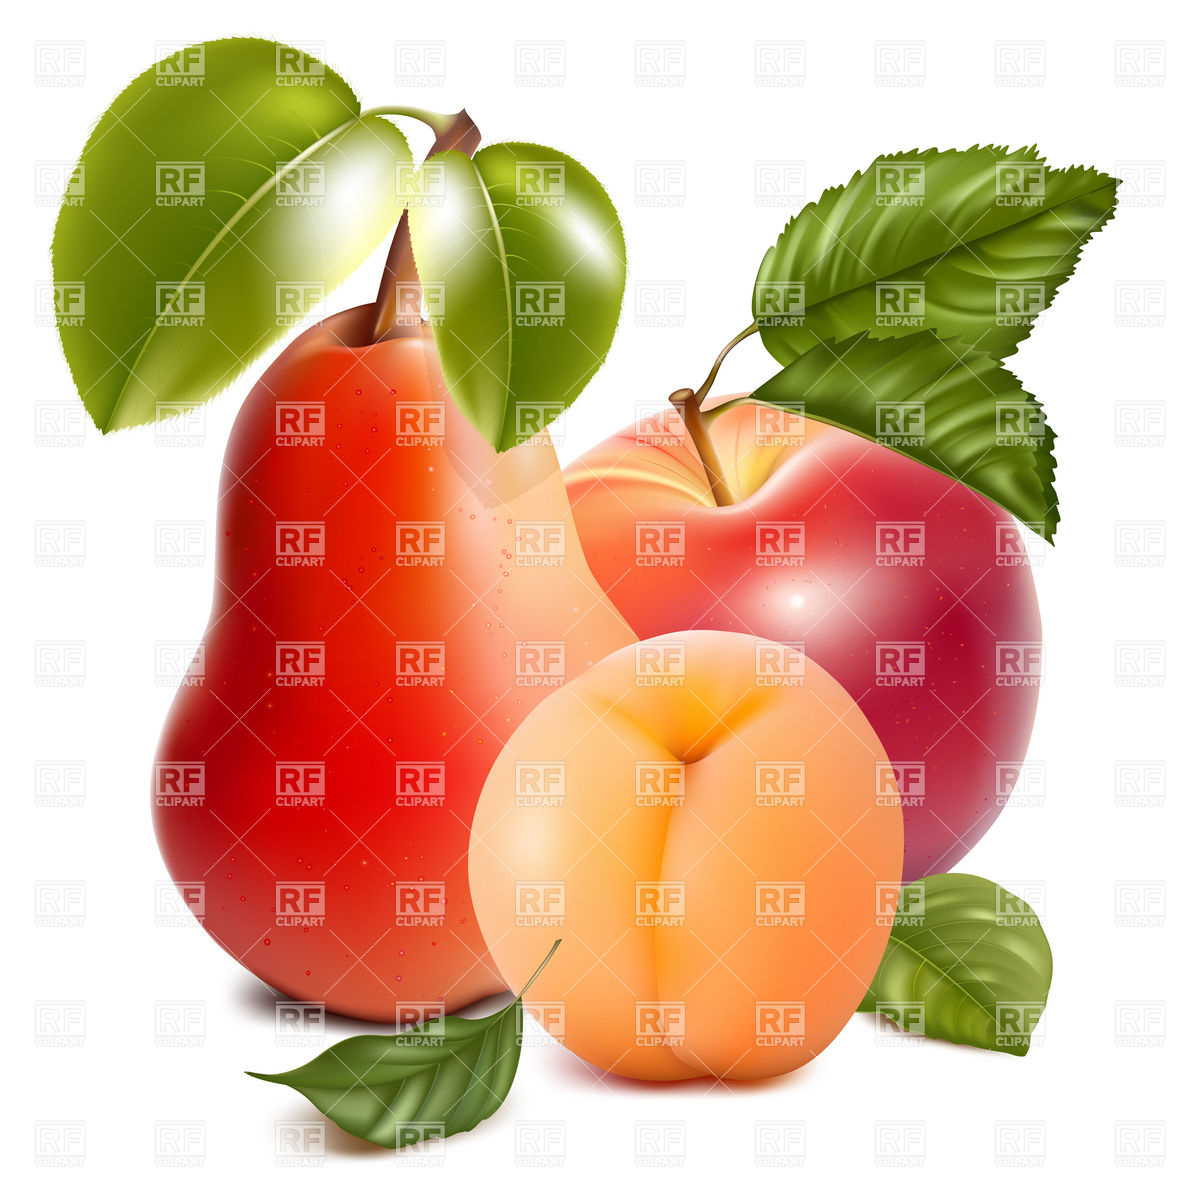 Fruits   Apple Pear And Apricot Food And Beverages Download Royalty